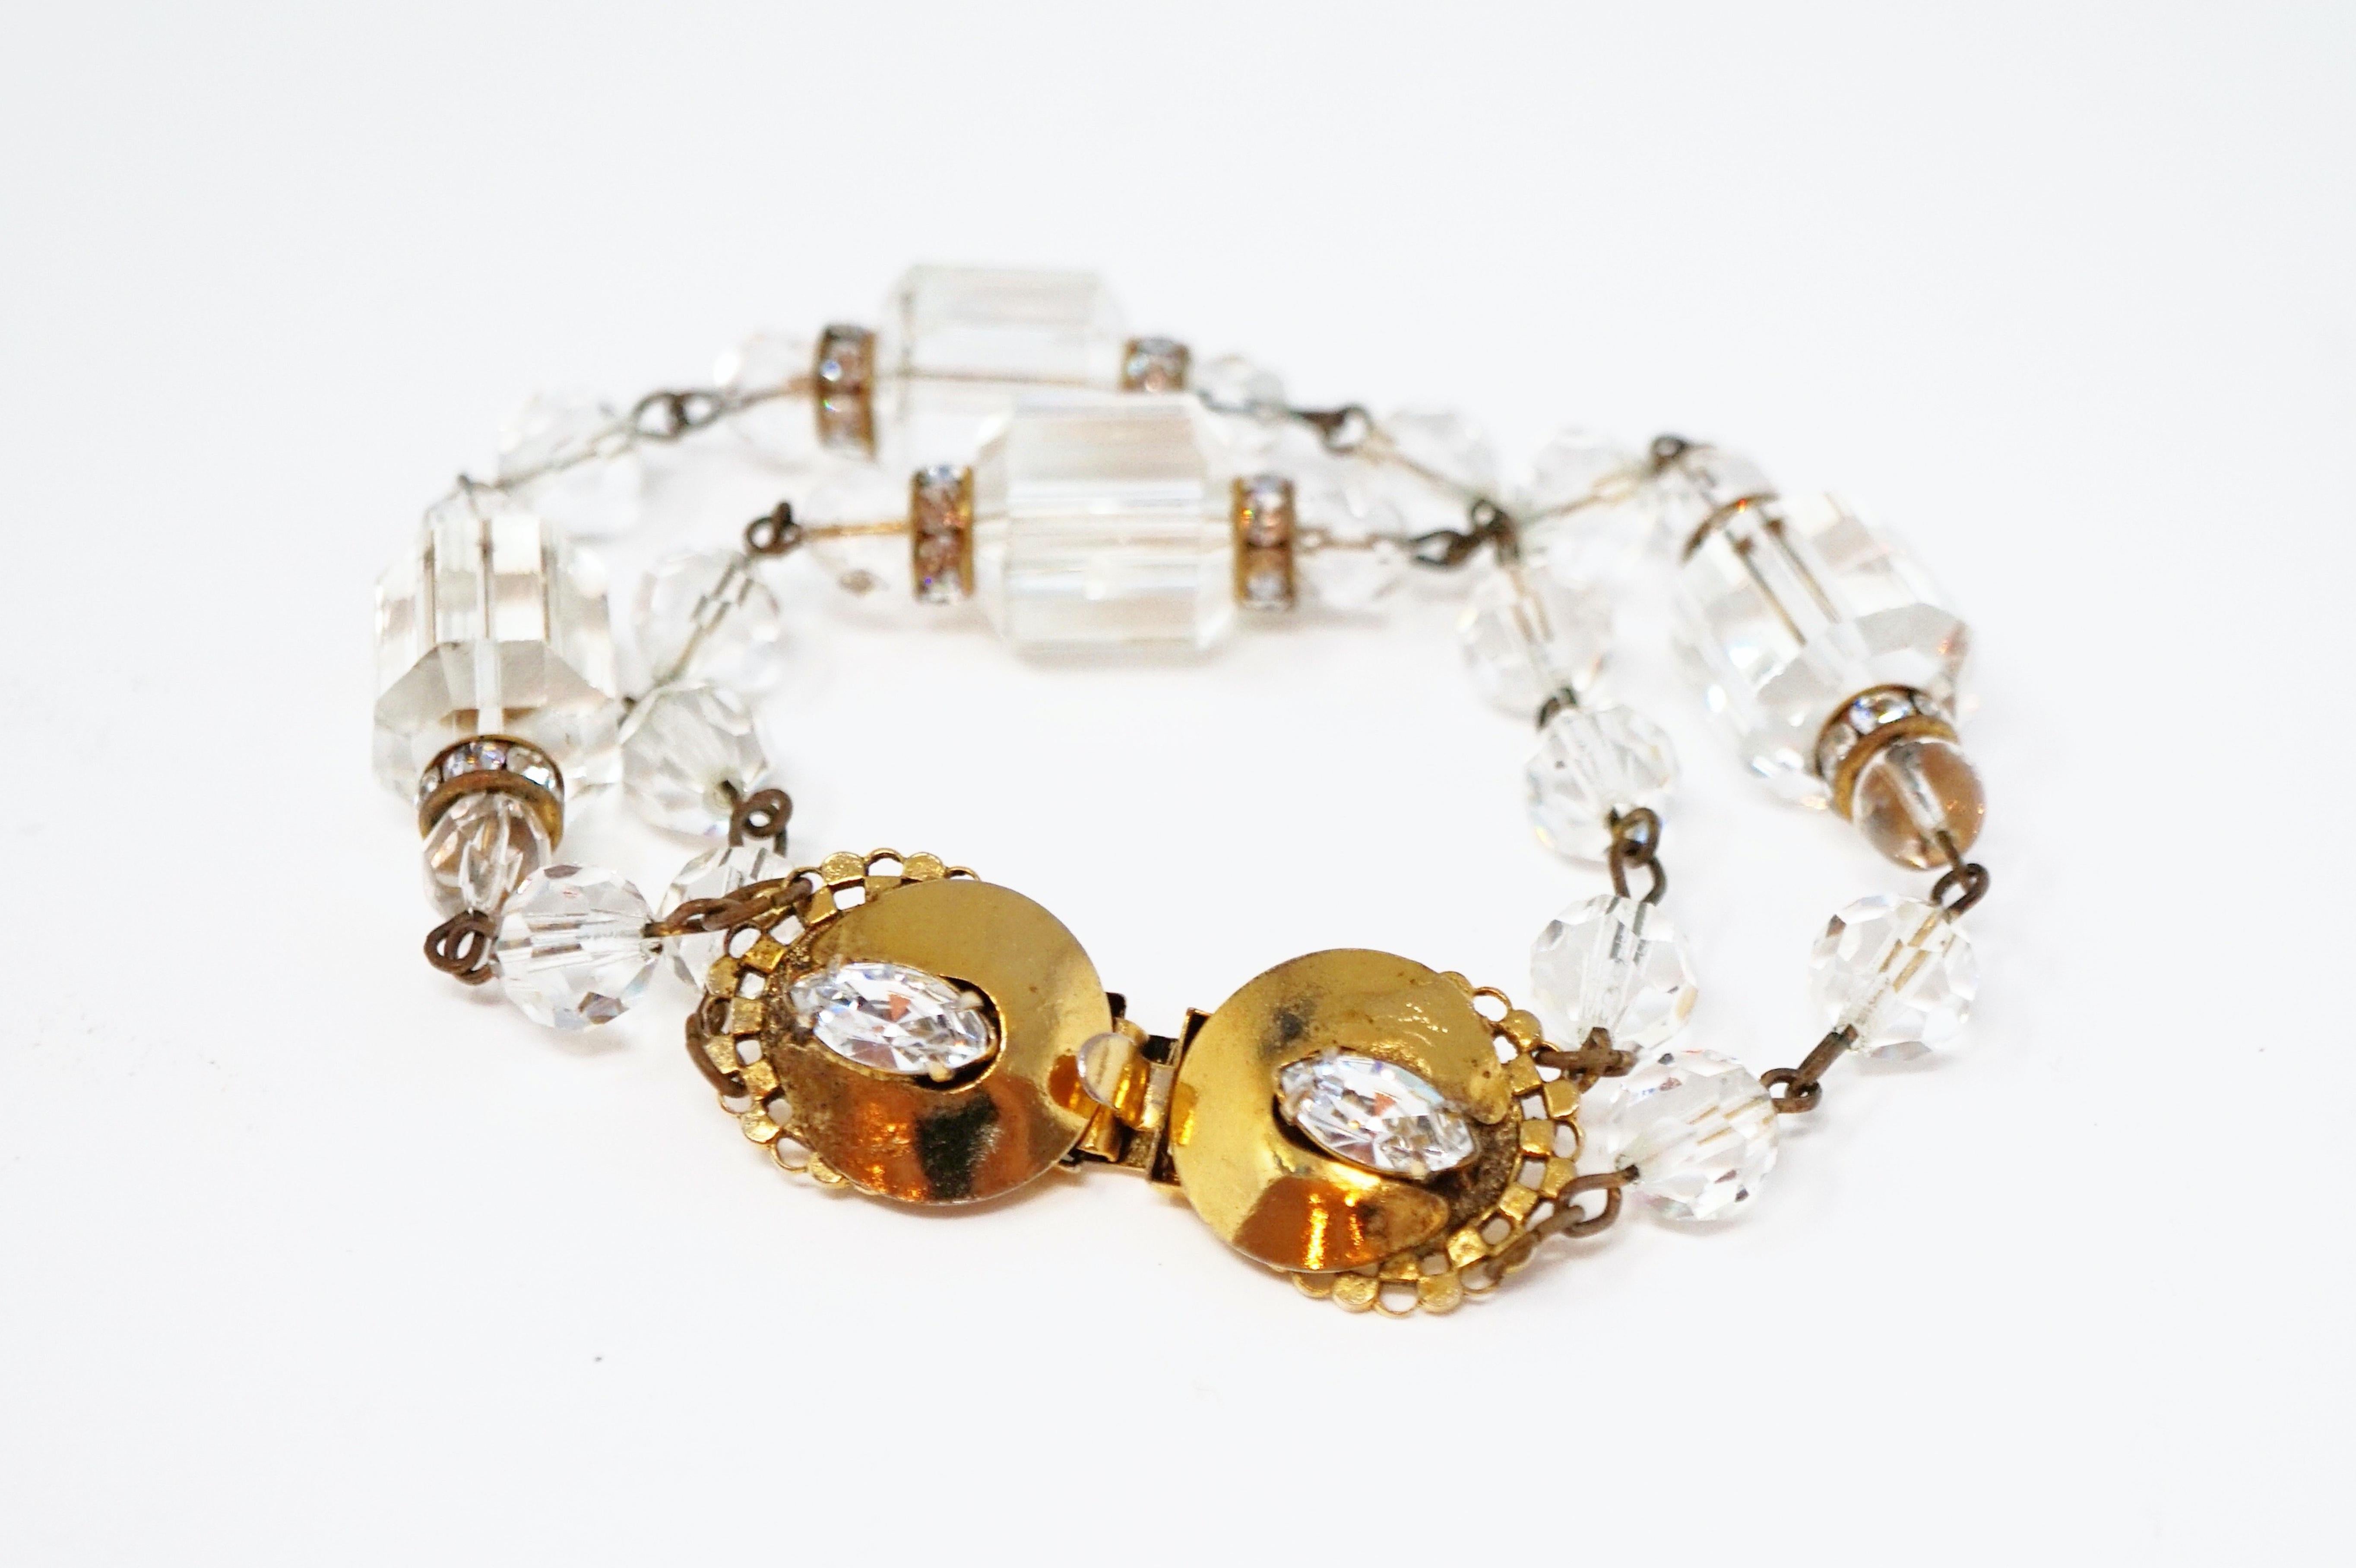 Beautiful vintage crystal beaded double strand bracelet by Freirich, circa 1960s.  Composed of faceted barrel cut crystal beads accented with round faceted beads and gold tone hardware.  Two marquise cut crystals accent box clasp hardware. A